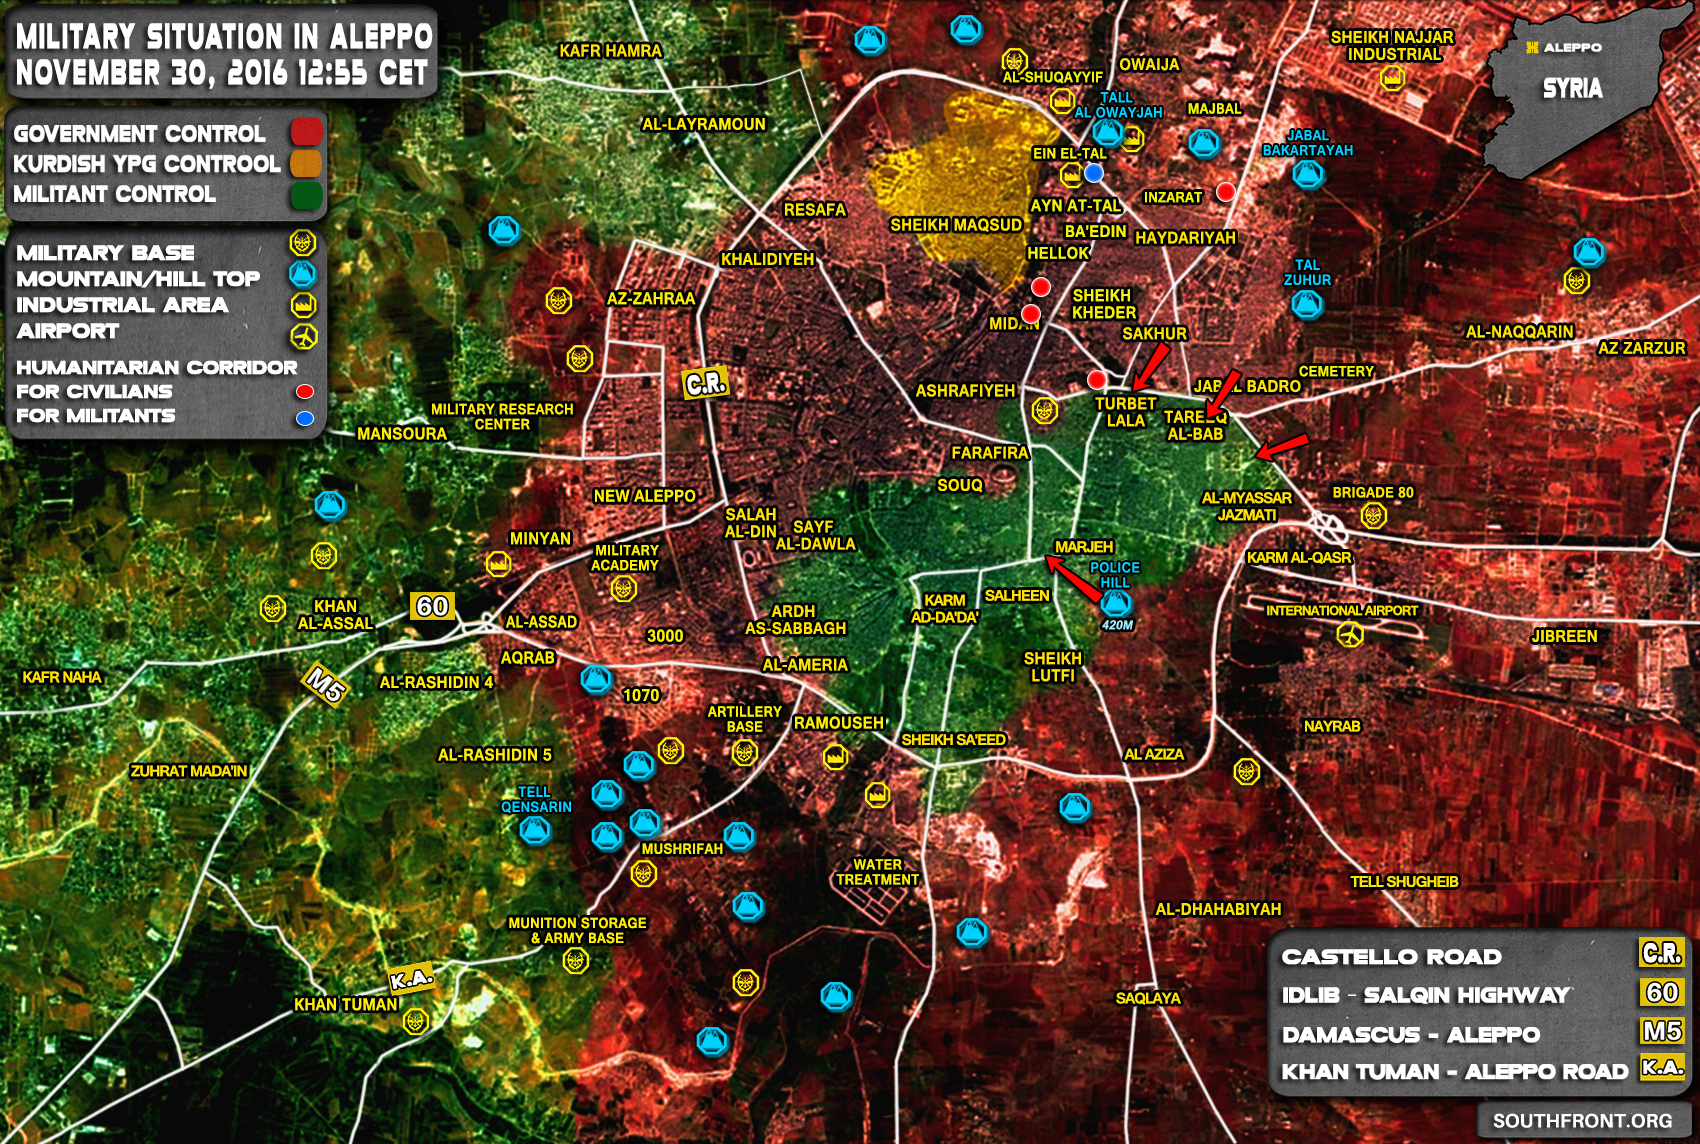 Overview of Military Situation in Aleppo City on November 30, 2016